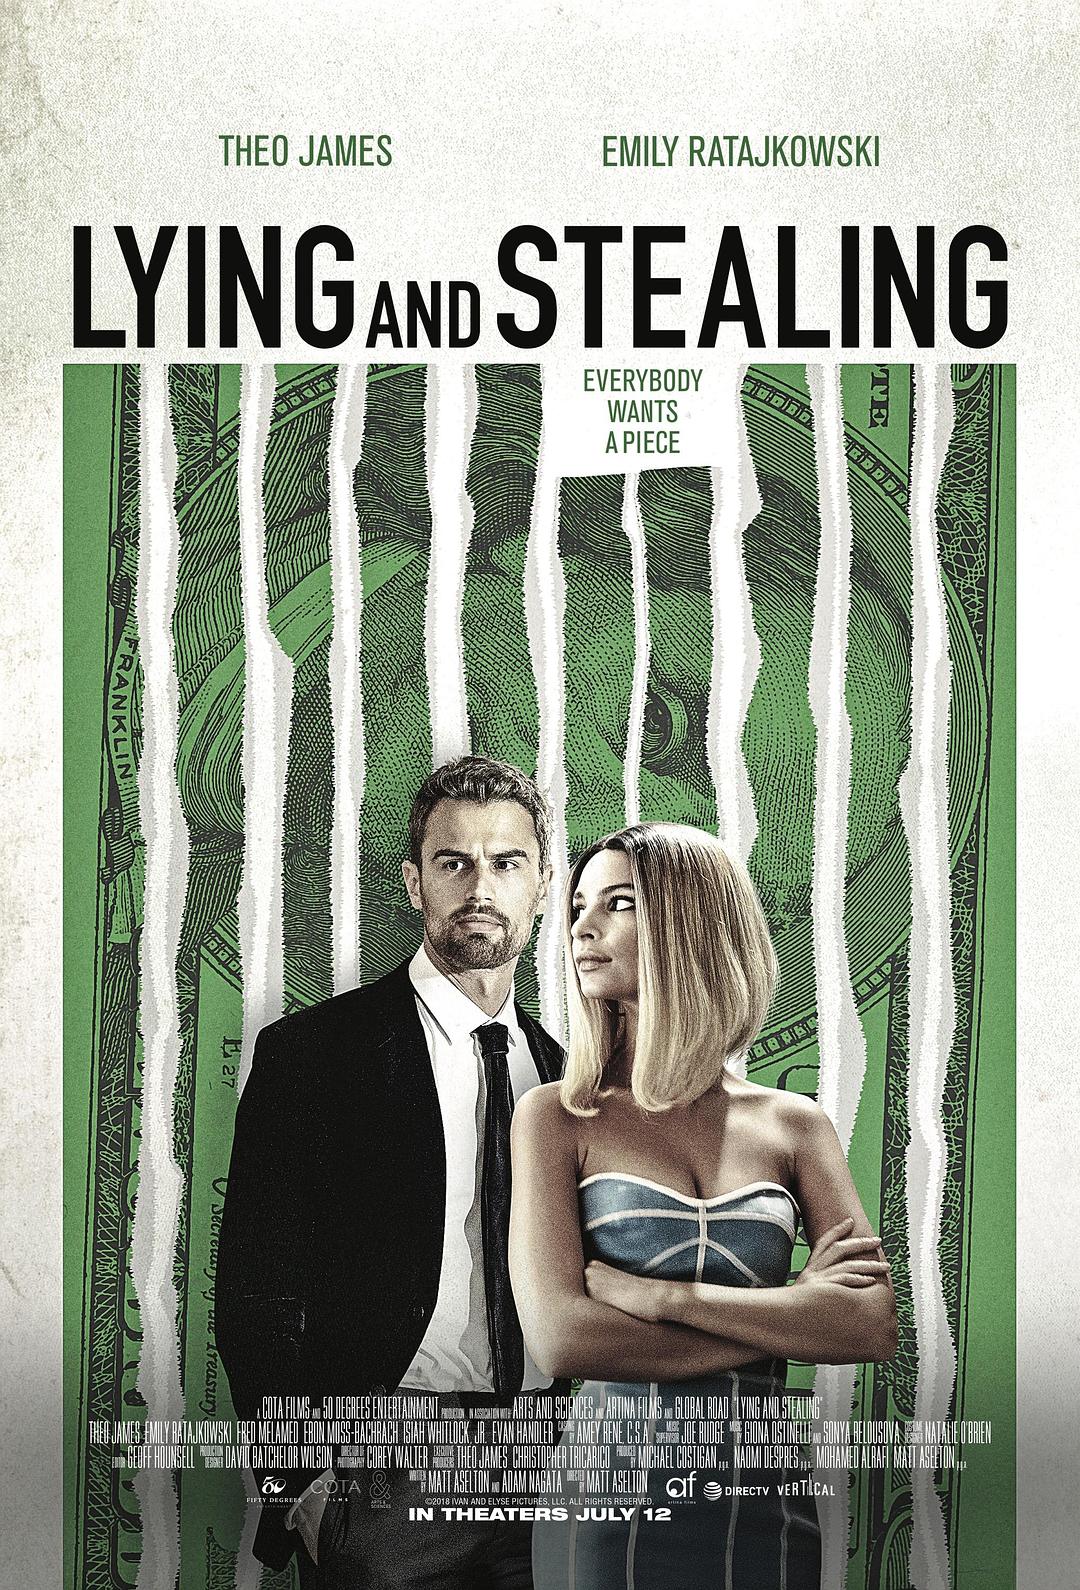 ͵/Estafadores() Lying.and.Stealing.2019.1080p.BluRay.x264-PSYCHD 6.57GB-1.png